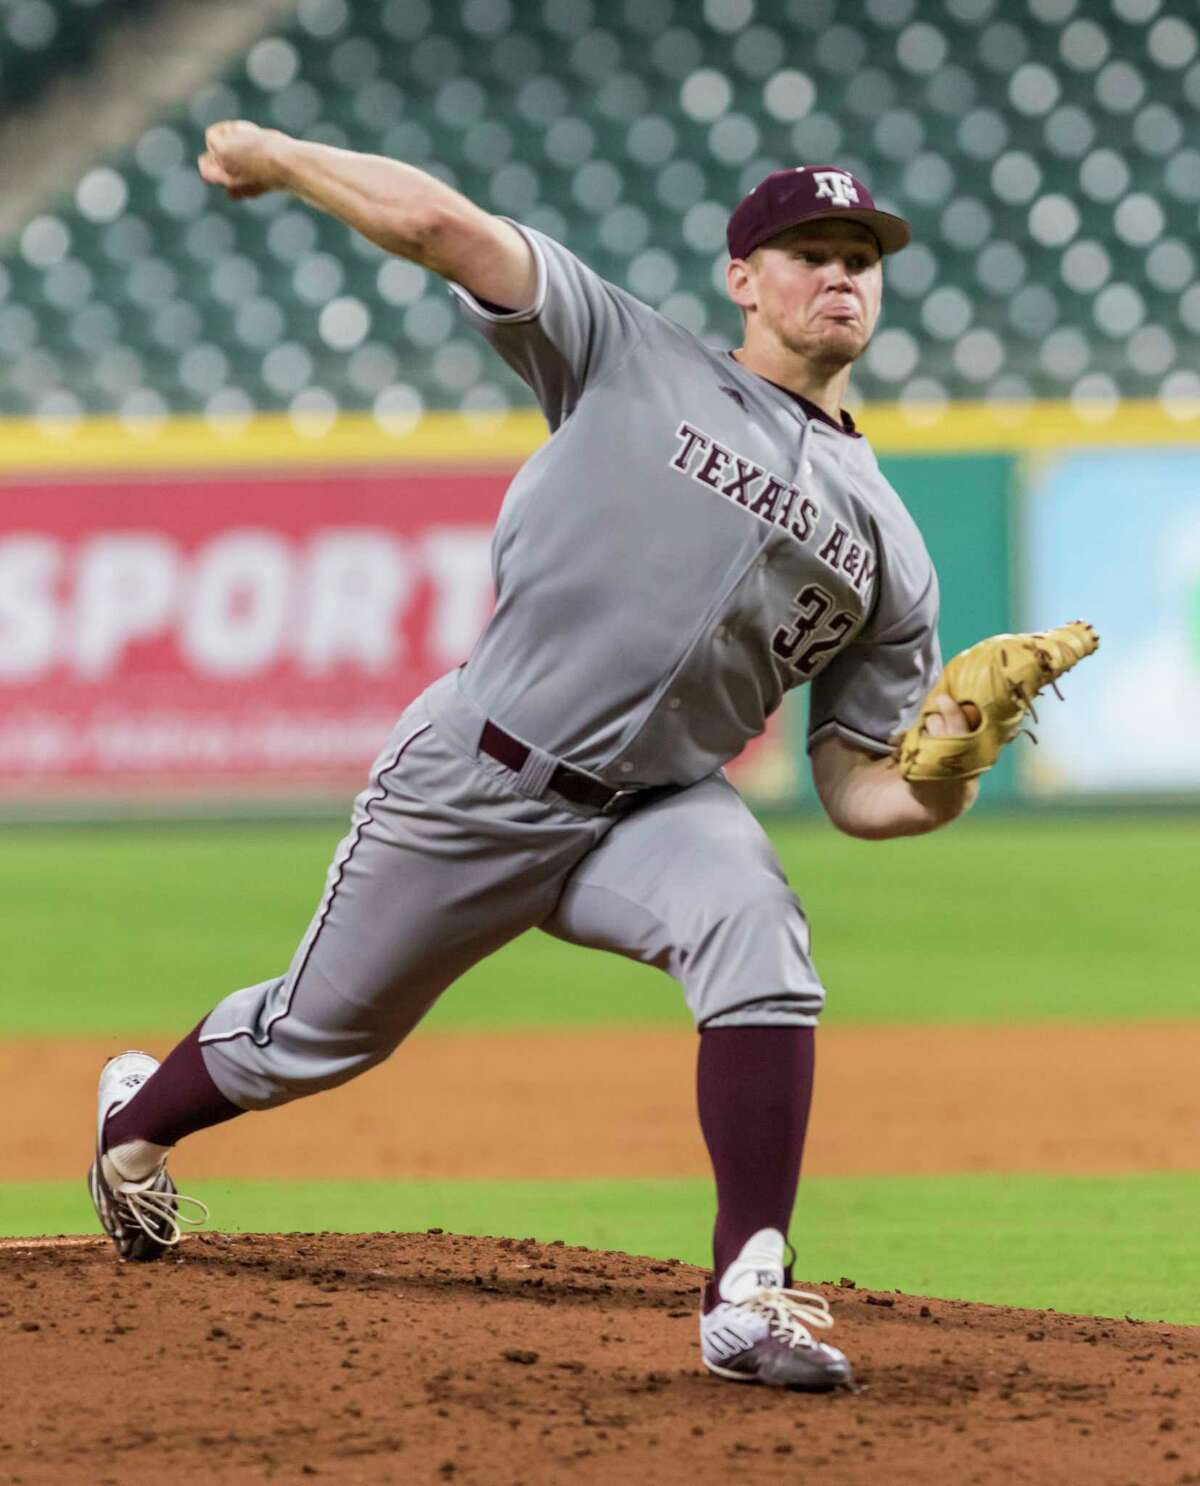 ﻿Stephen Kolek's arm will be fresh for a potential College World Series outing after the Aggies made quick work of Davidson in their super regional.